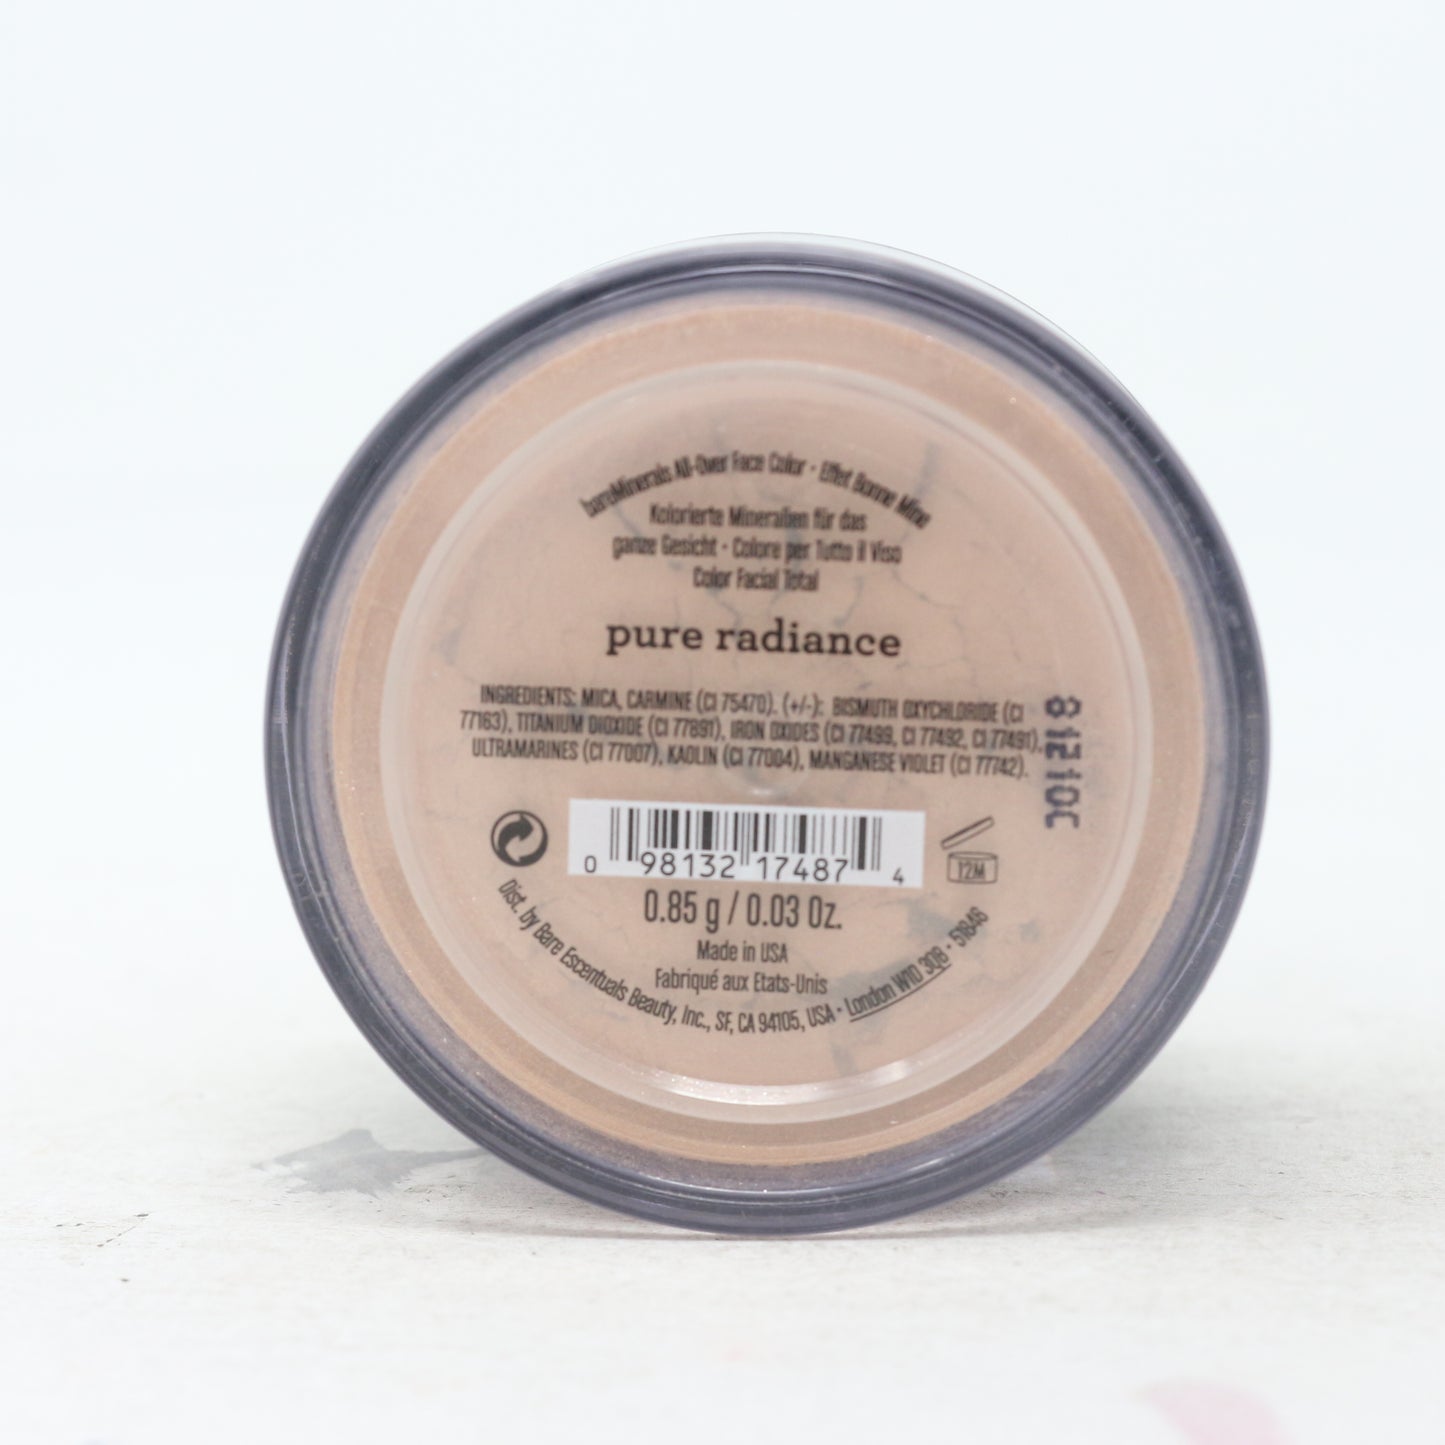 All Over Face Loose Highlighter Powder 0.85 g